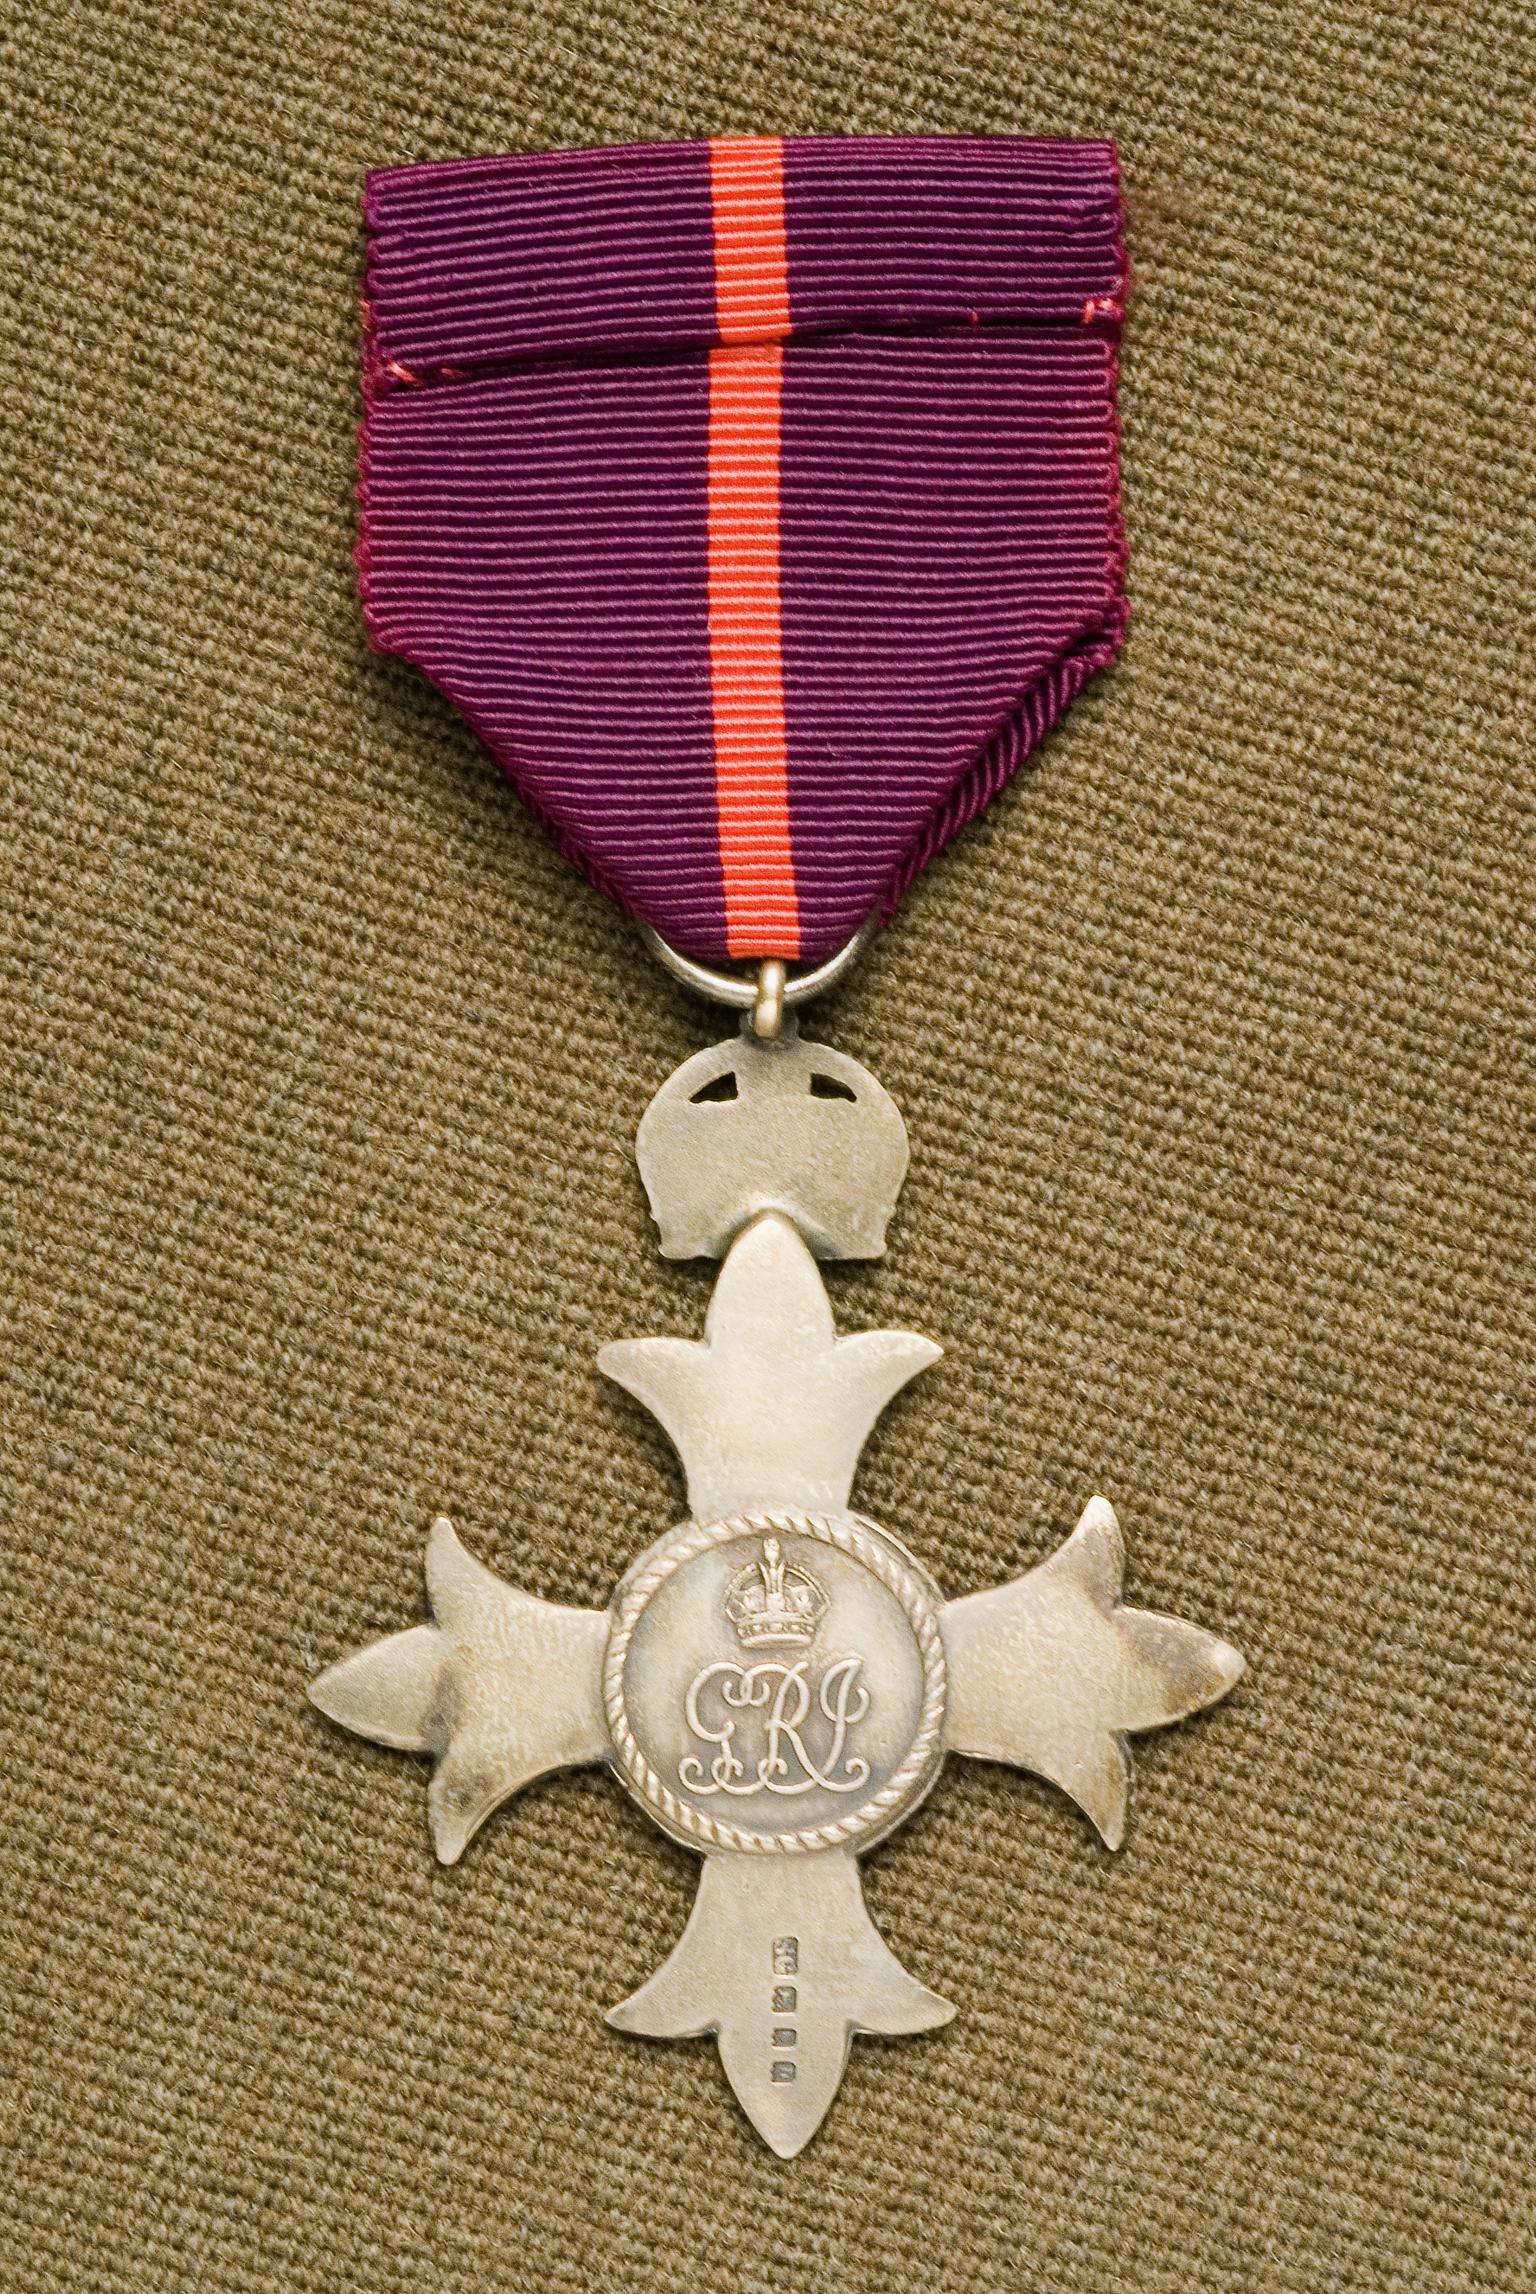 Order of the British Empire, Military Division